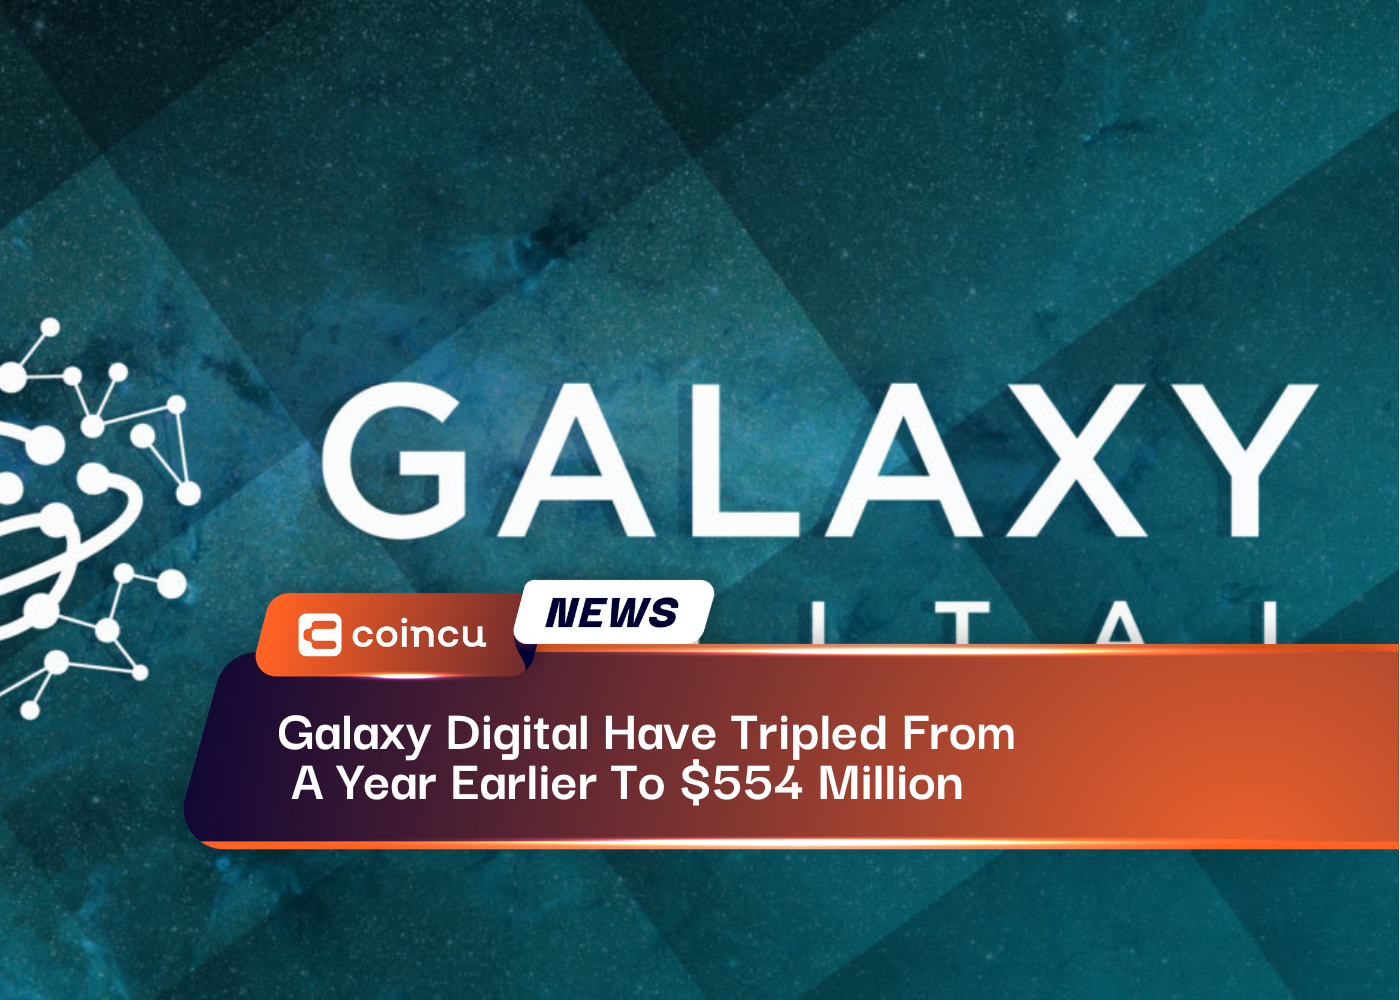 Galaxy Digital Have Tripled From